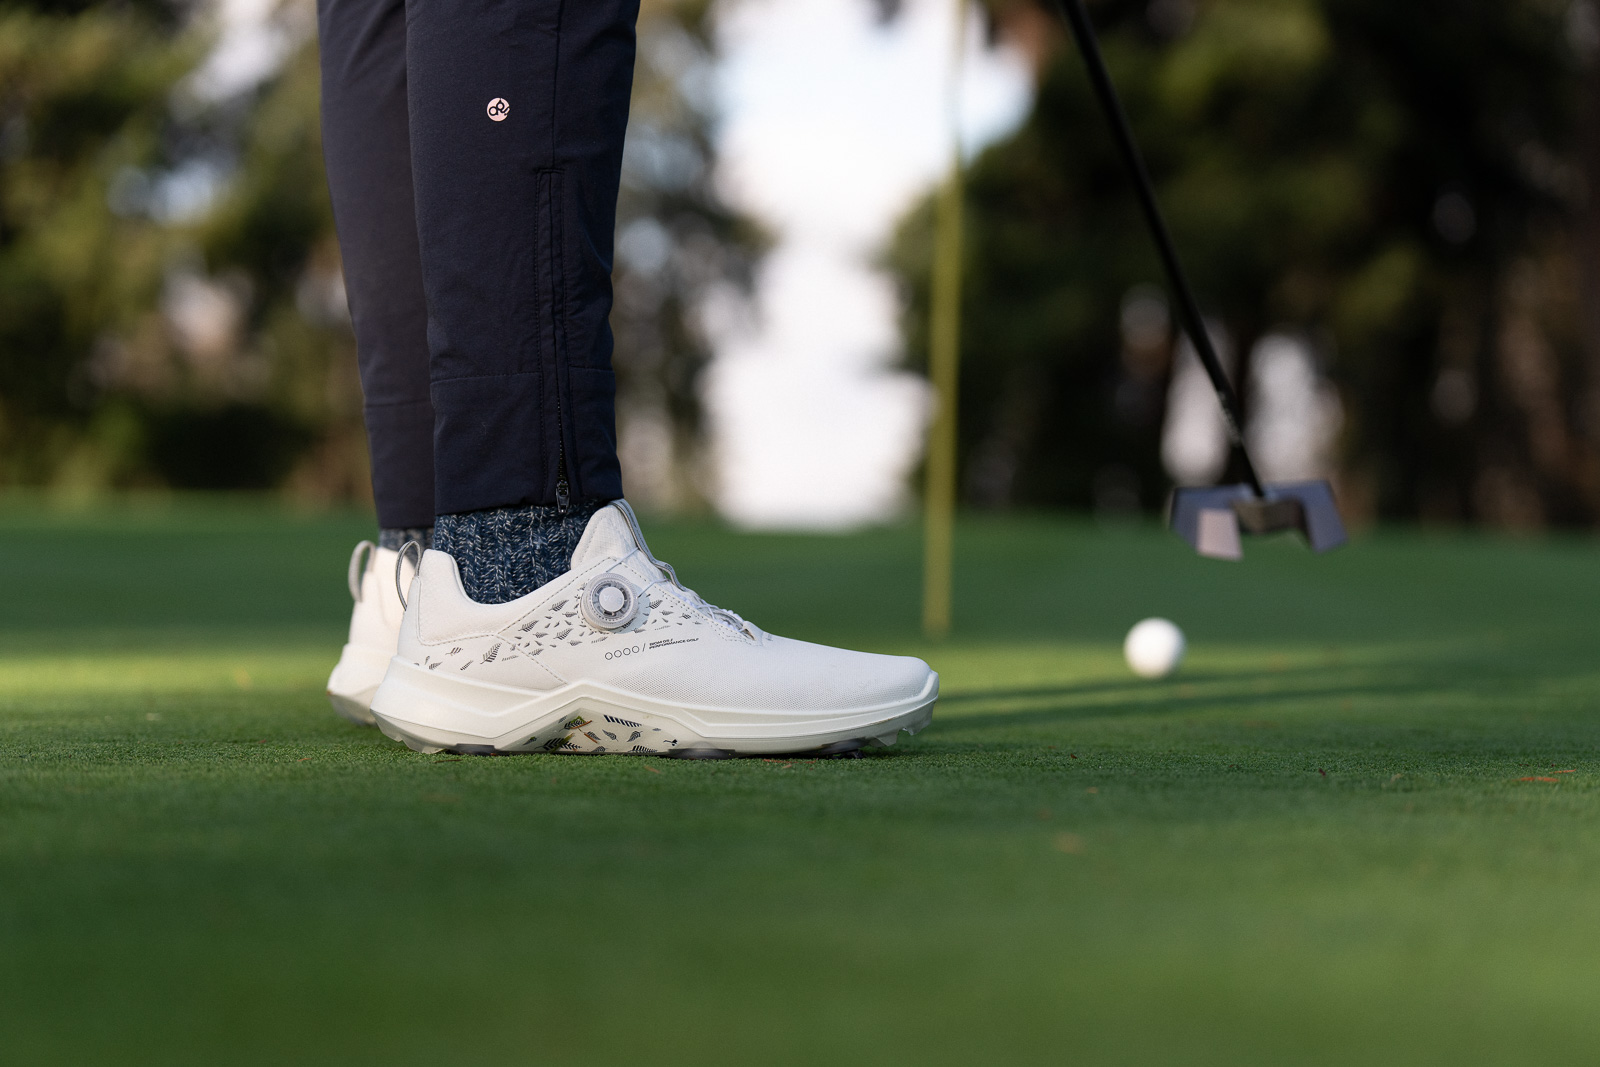 Women's Ecco Biom G5 Golf Shoes Review: Just as Good as Expected